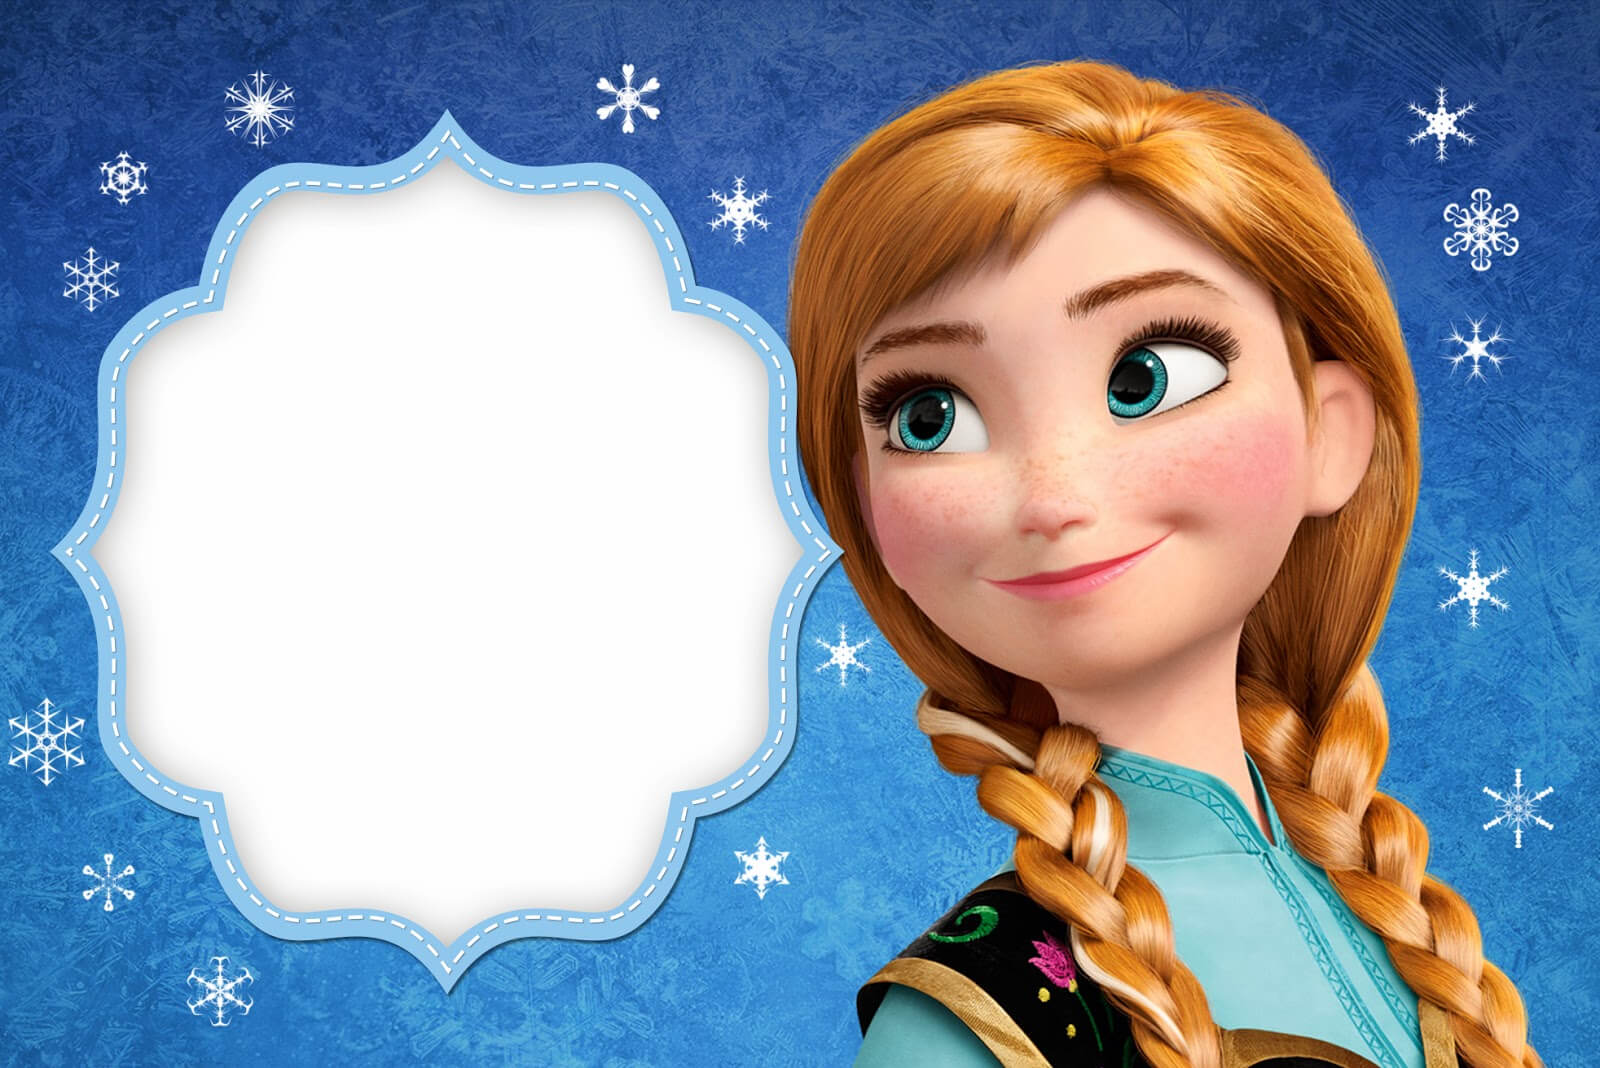 Frozen: Free Printable Cards Or Party Invitations. – Oh My For Frozen Birthday Card Template